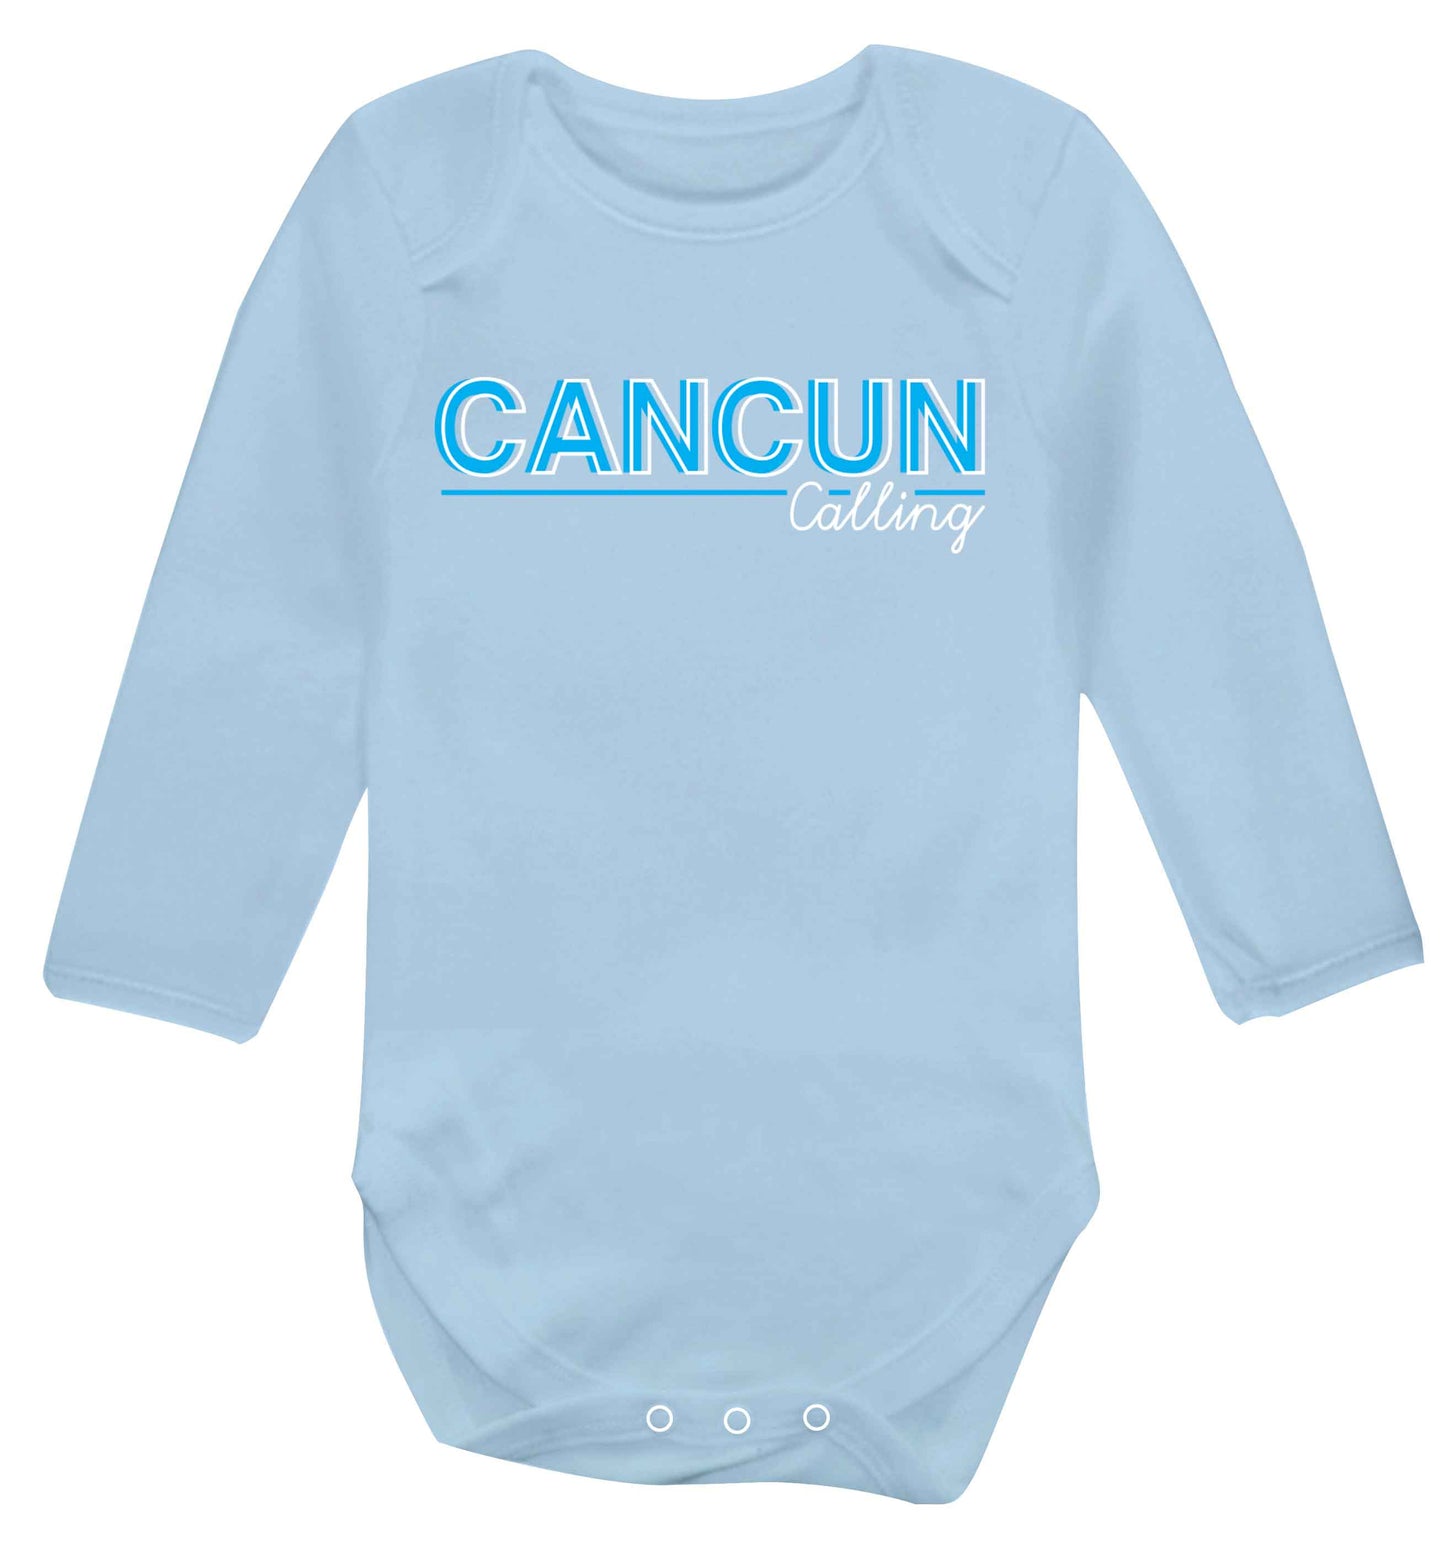 Cancun calling Baby Vest long sleeved pale blue 6-12 months